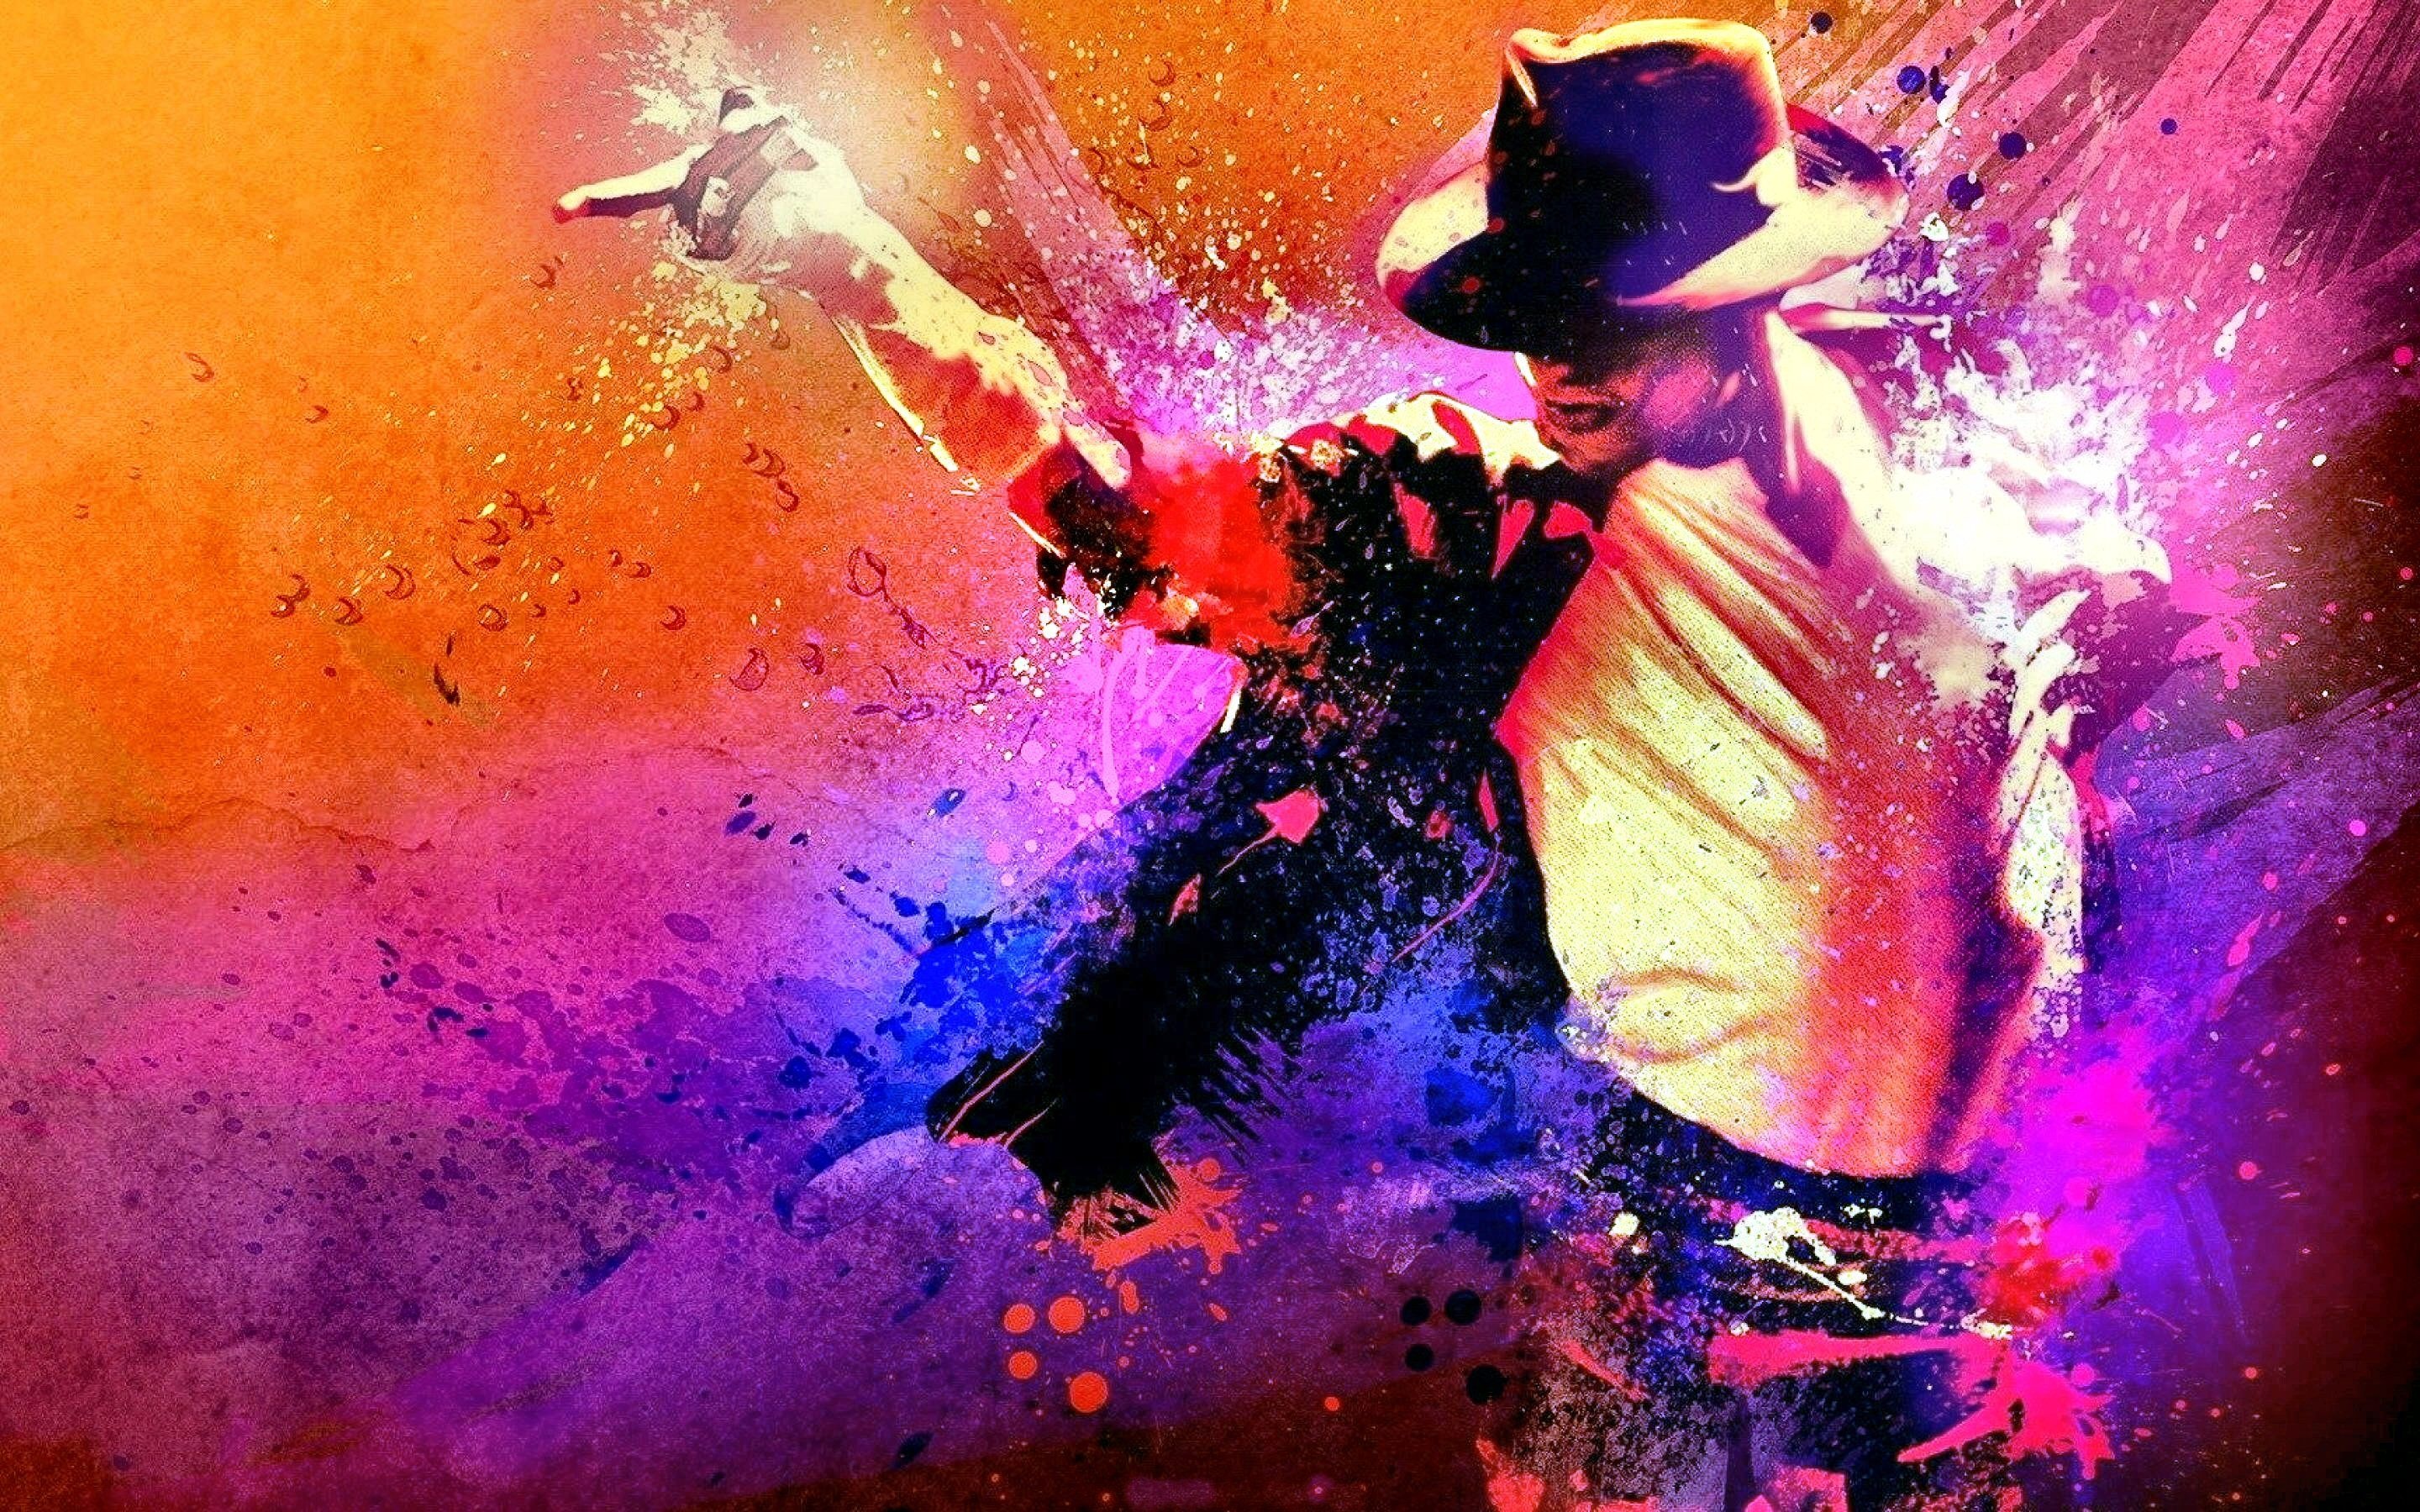 Moonwalk Dance: Fan Art, MJ, Dance Style, Performing the moves, Creativity, A popping move. 2880x1800 HD Wallpaper.